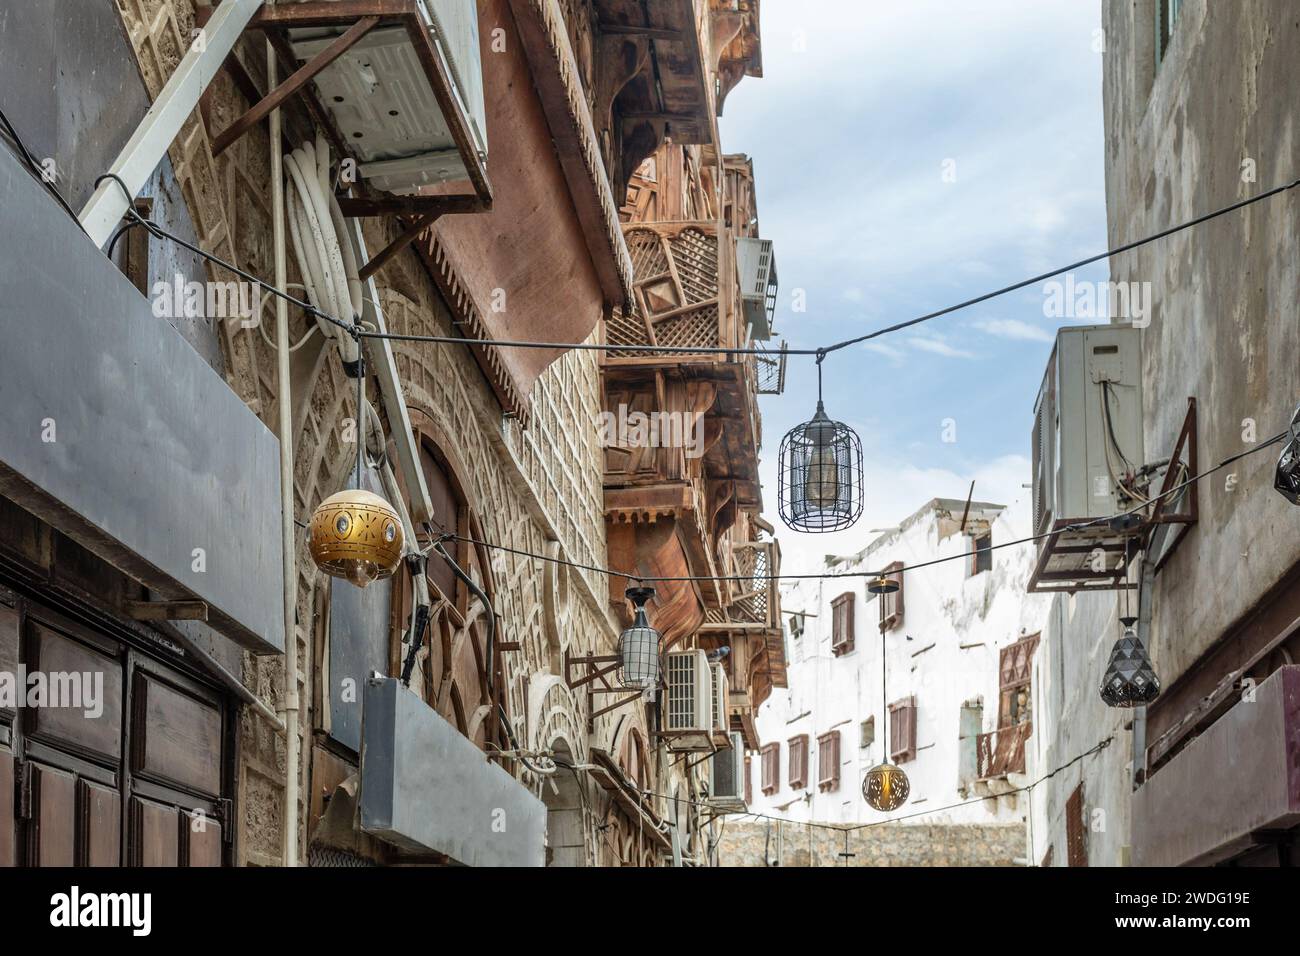 Al-Balad old town with traditional muslim houses with wooden windows and balconies, Jeddah, Saudi Arabia8 Stock Photo